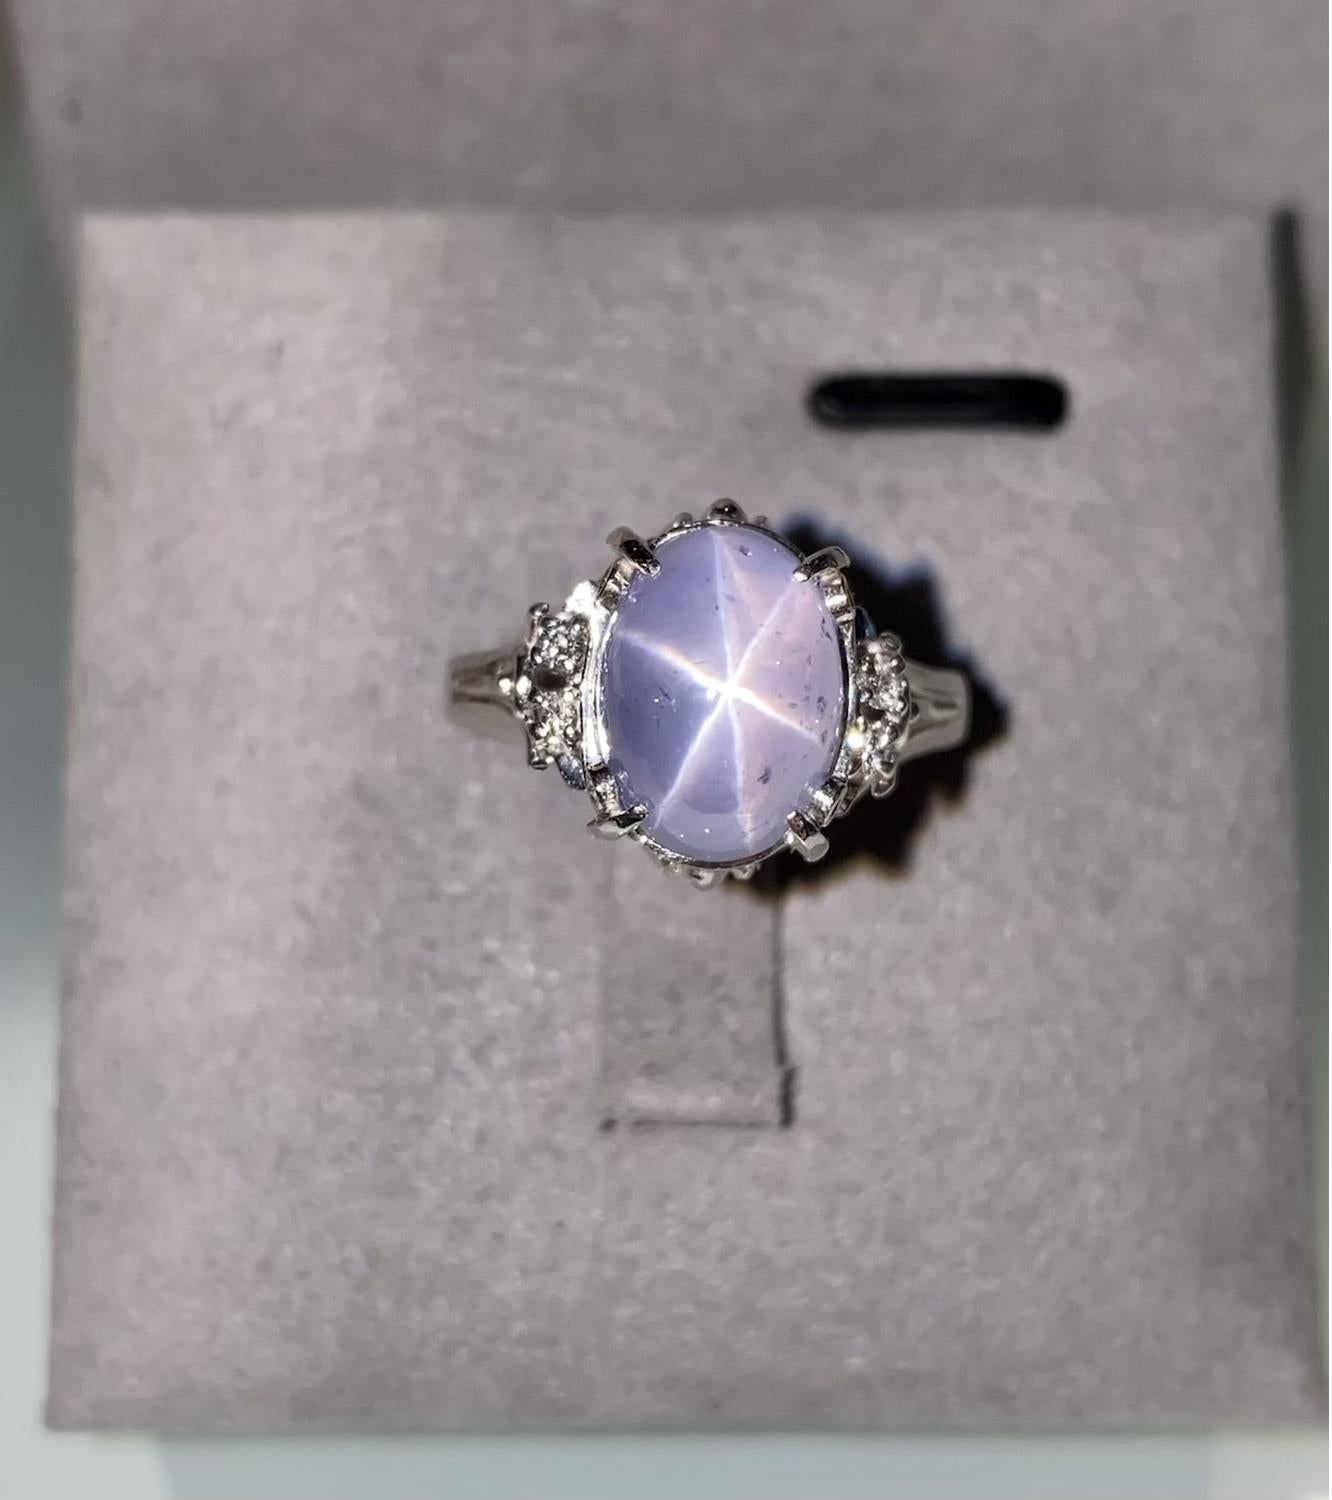 This is a very simple design aiming to give the Start Sapphire Cabochon as much attention as possible. The clearer the asterisks is on the star sapphire the more valuable it is.  

Main Star Sapphire weight is 7.53ct
Total Natural Diamond weight is